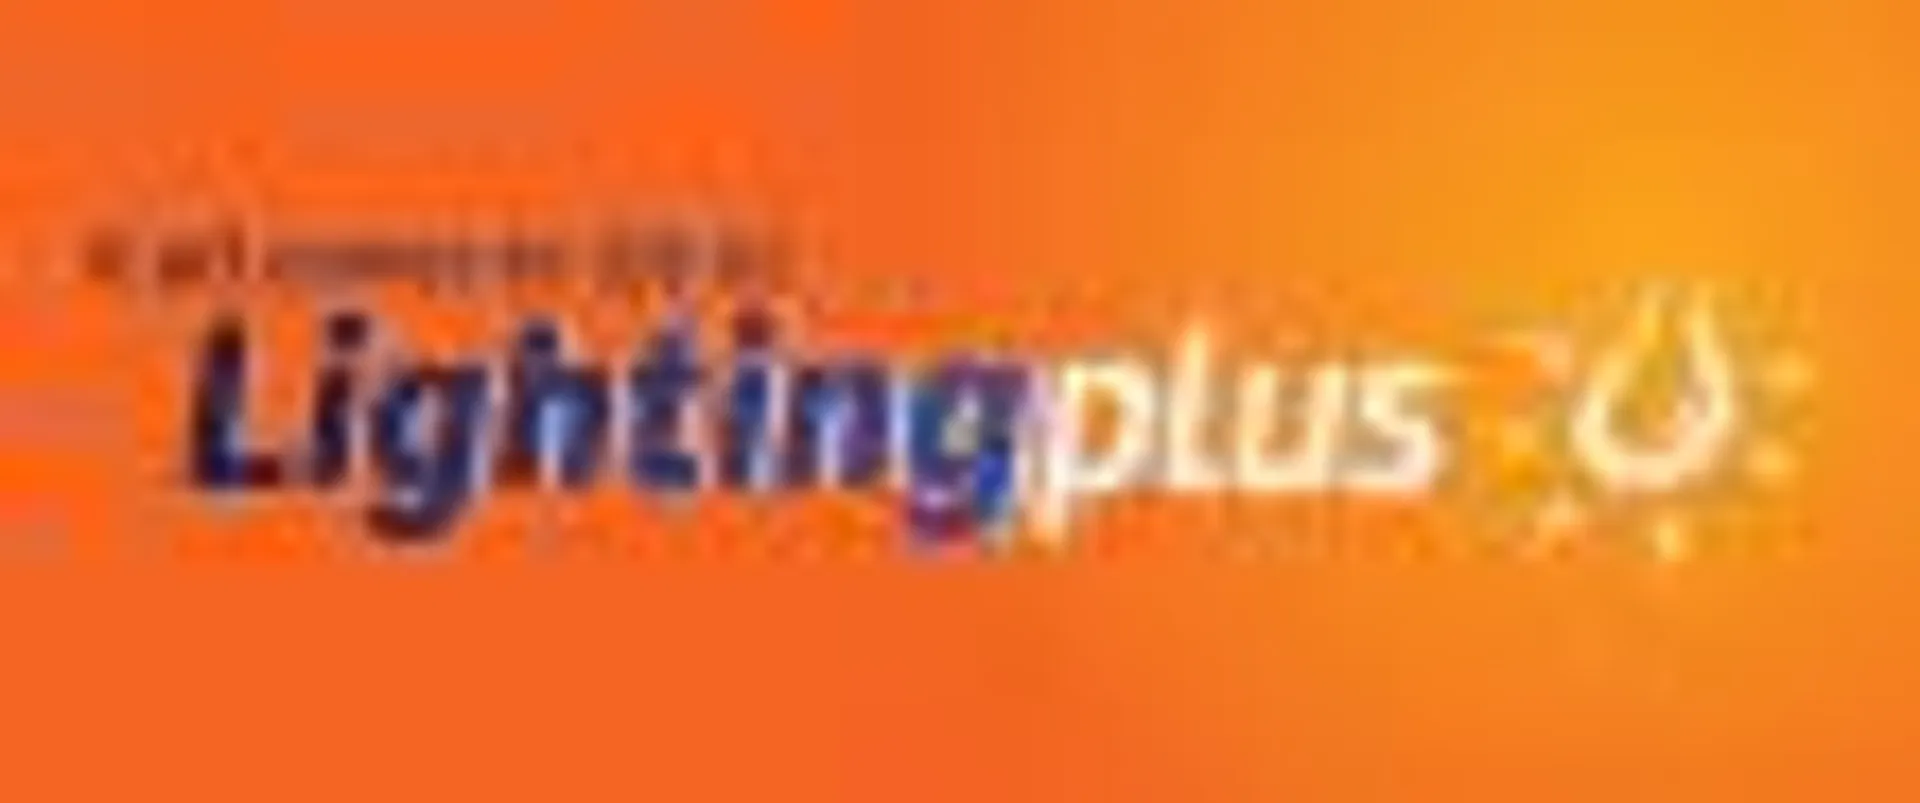 LIGHTING PLUS logo. Current weekly ad